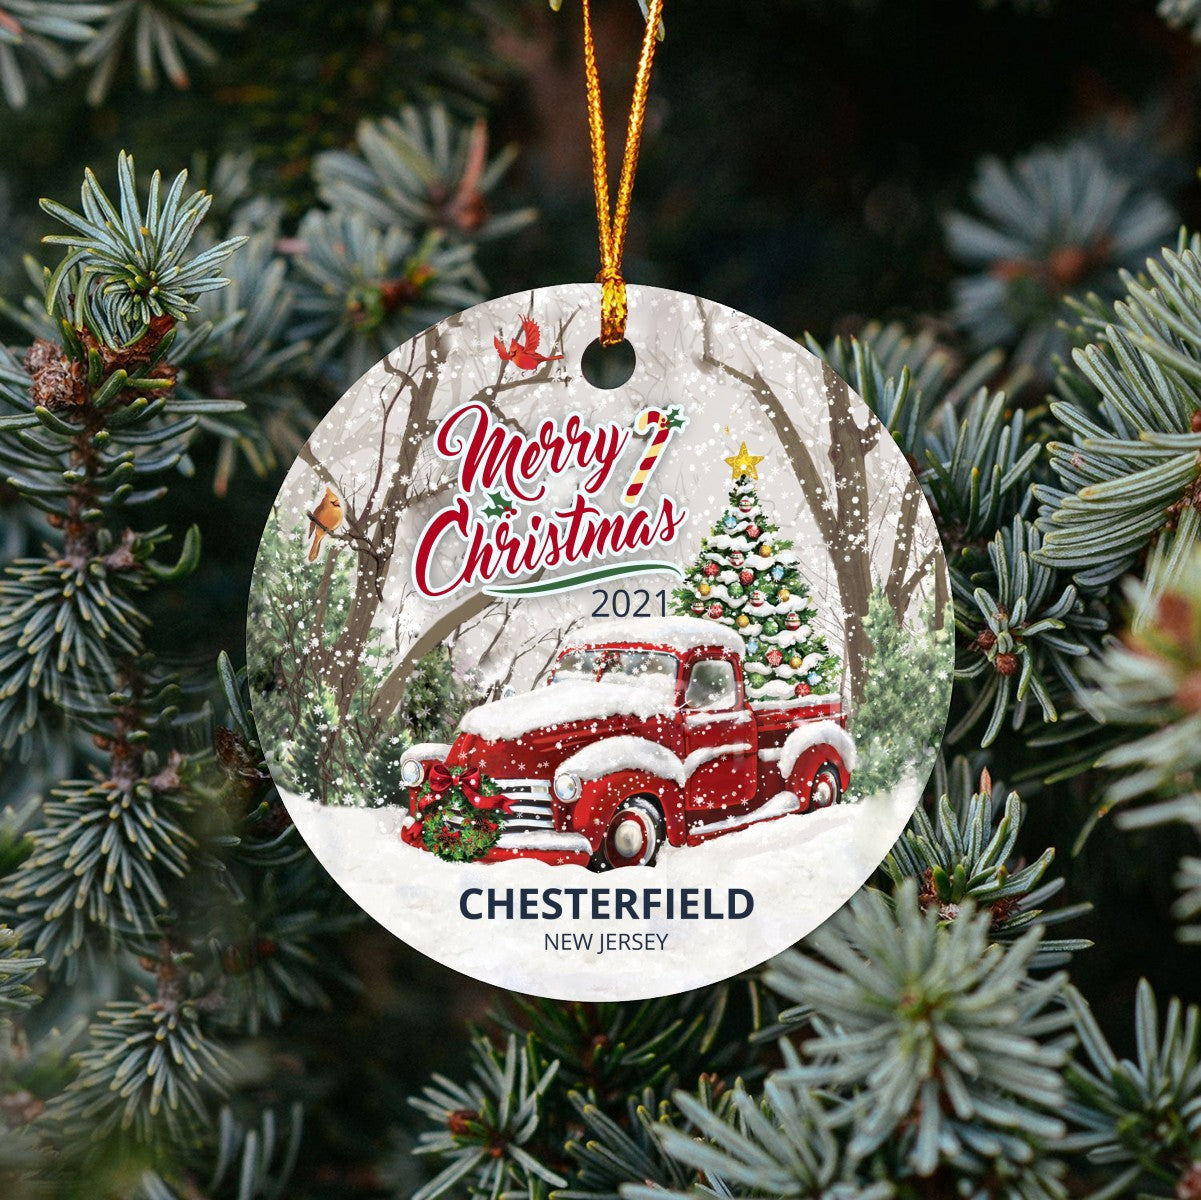 Christmas Tree Ornaments Chesterfield - Ornament With Name City, State Chesterfield New Jersey NJ Ornament - Red Truck Xmas Ornaments 3'' Plastic Gift For Family, Friend And Housewarming